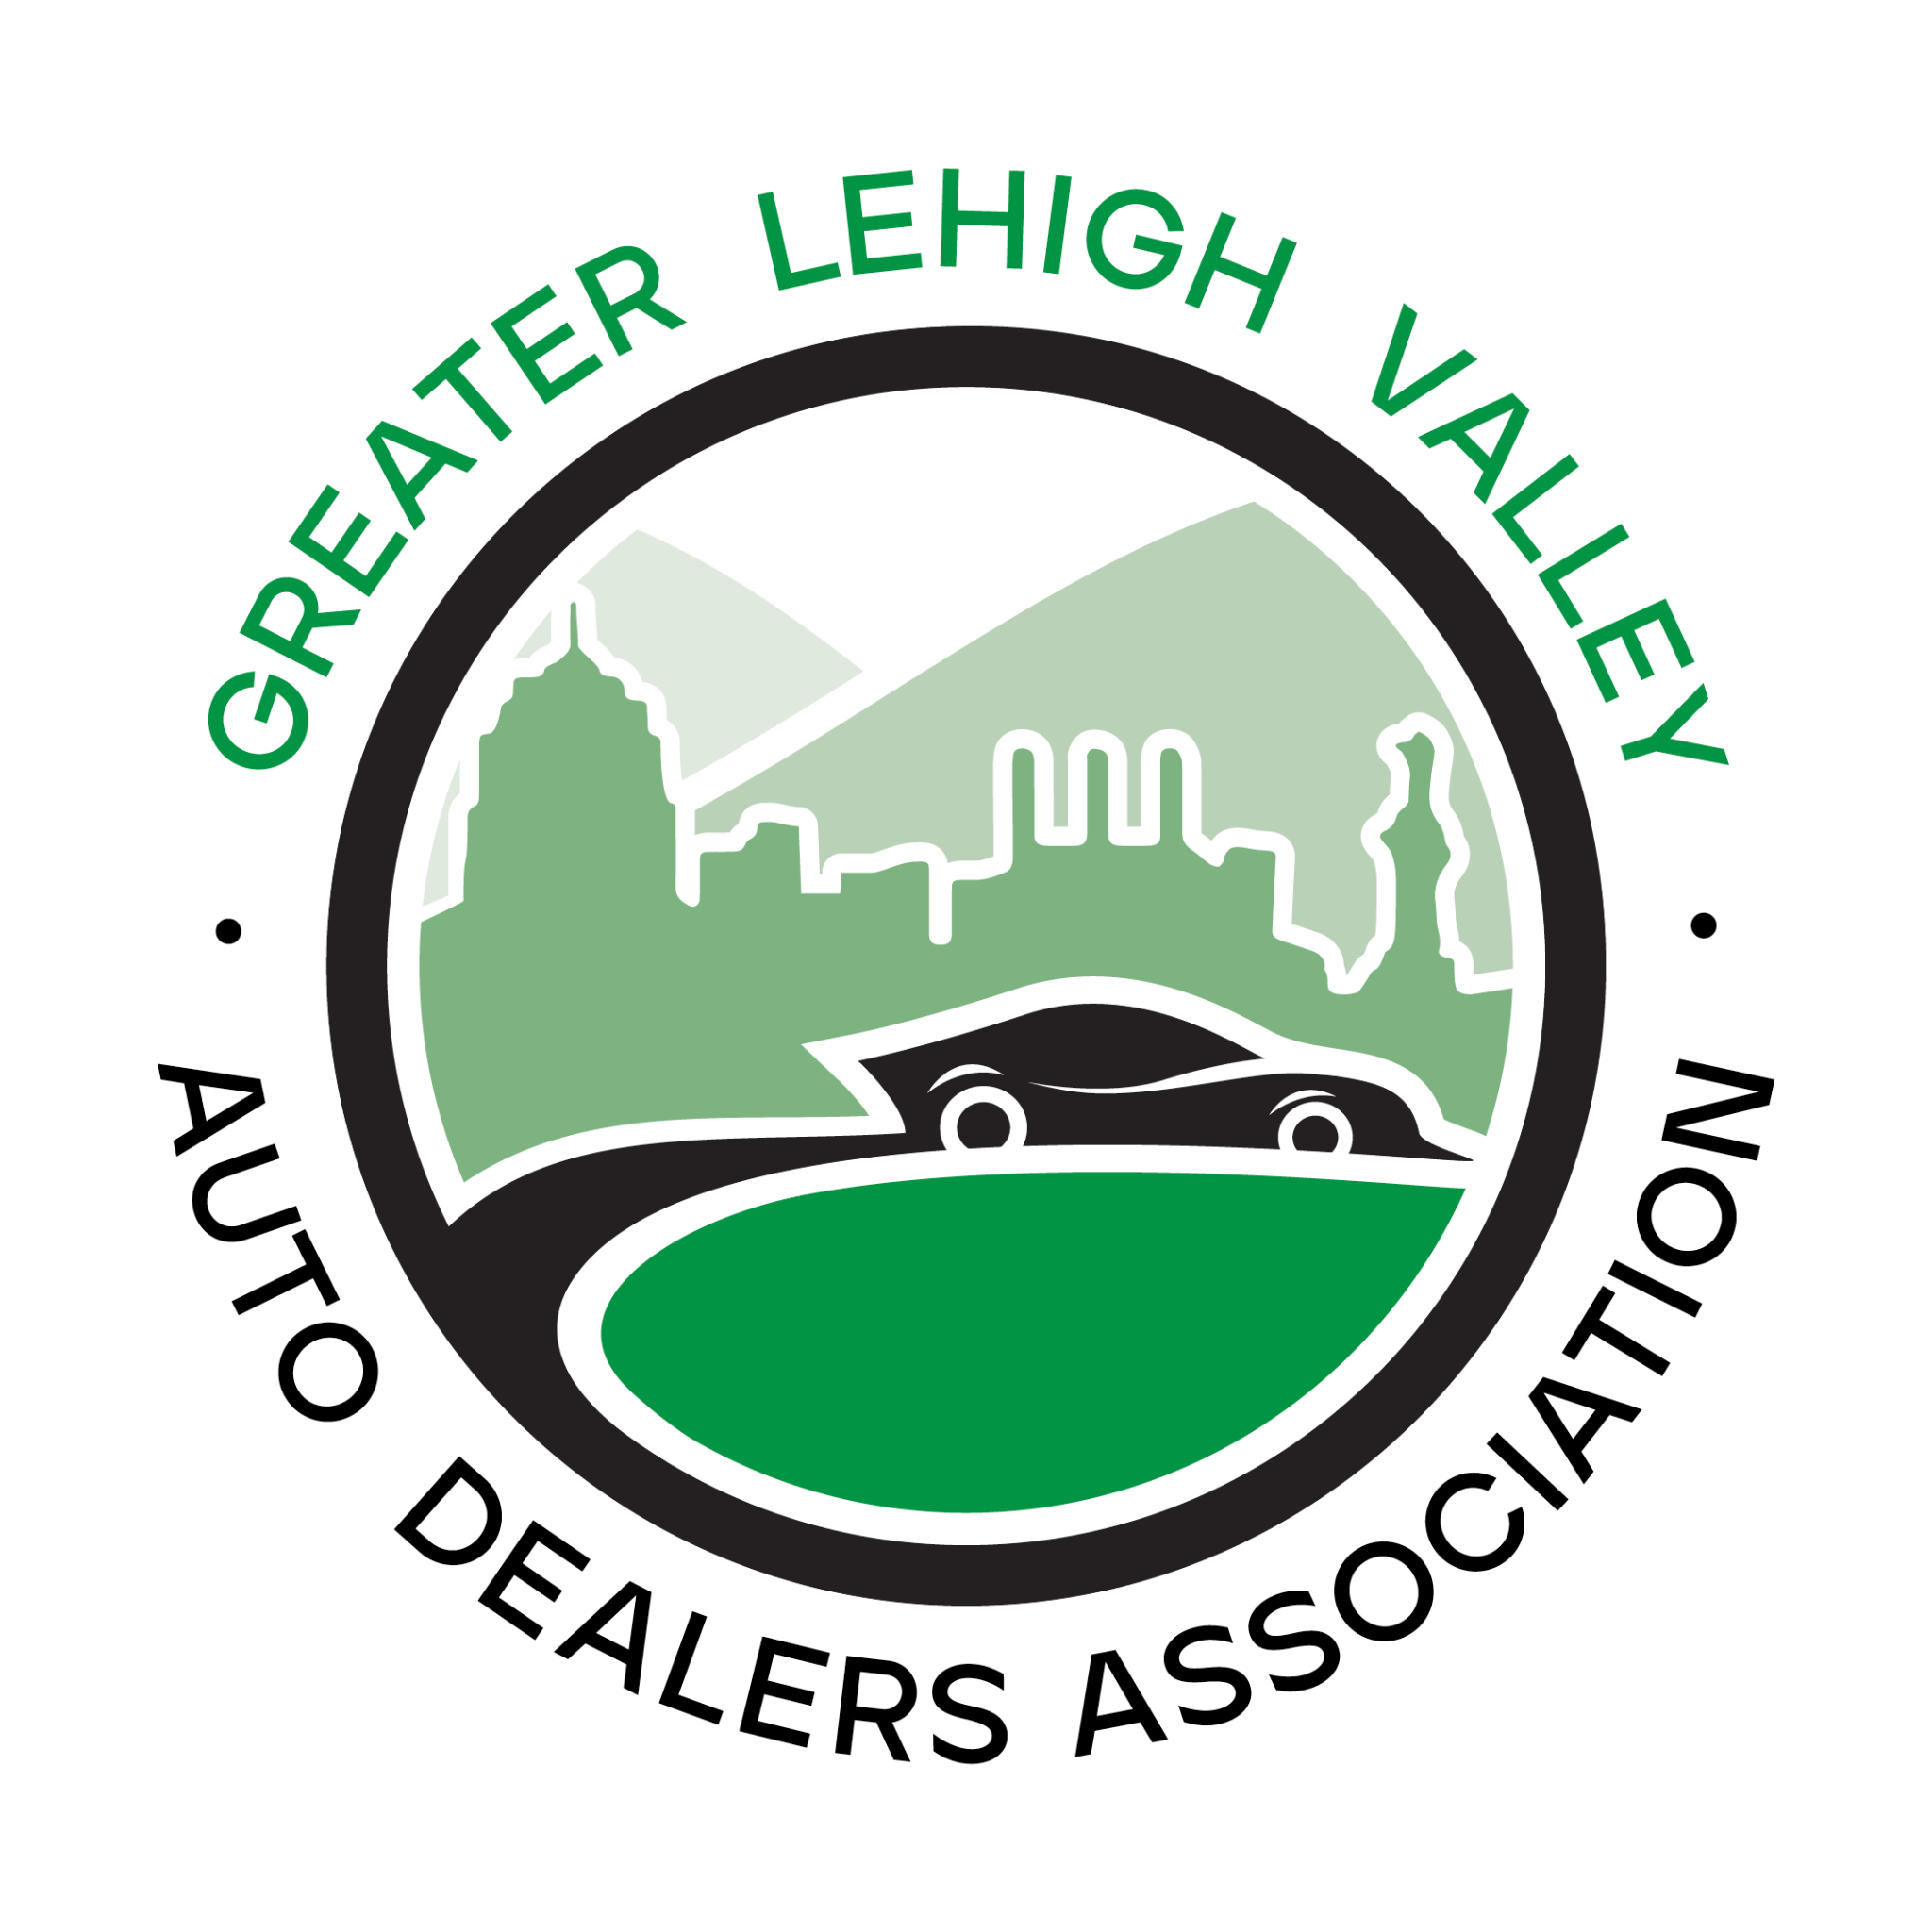 Greater Lehigh Valley Auto Show Trade Show and Insights Market